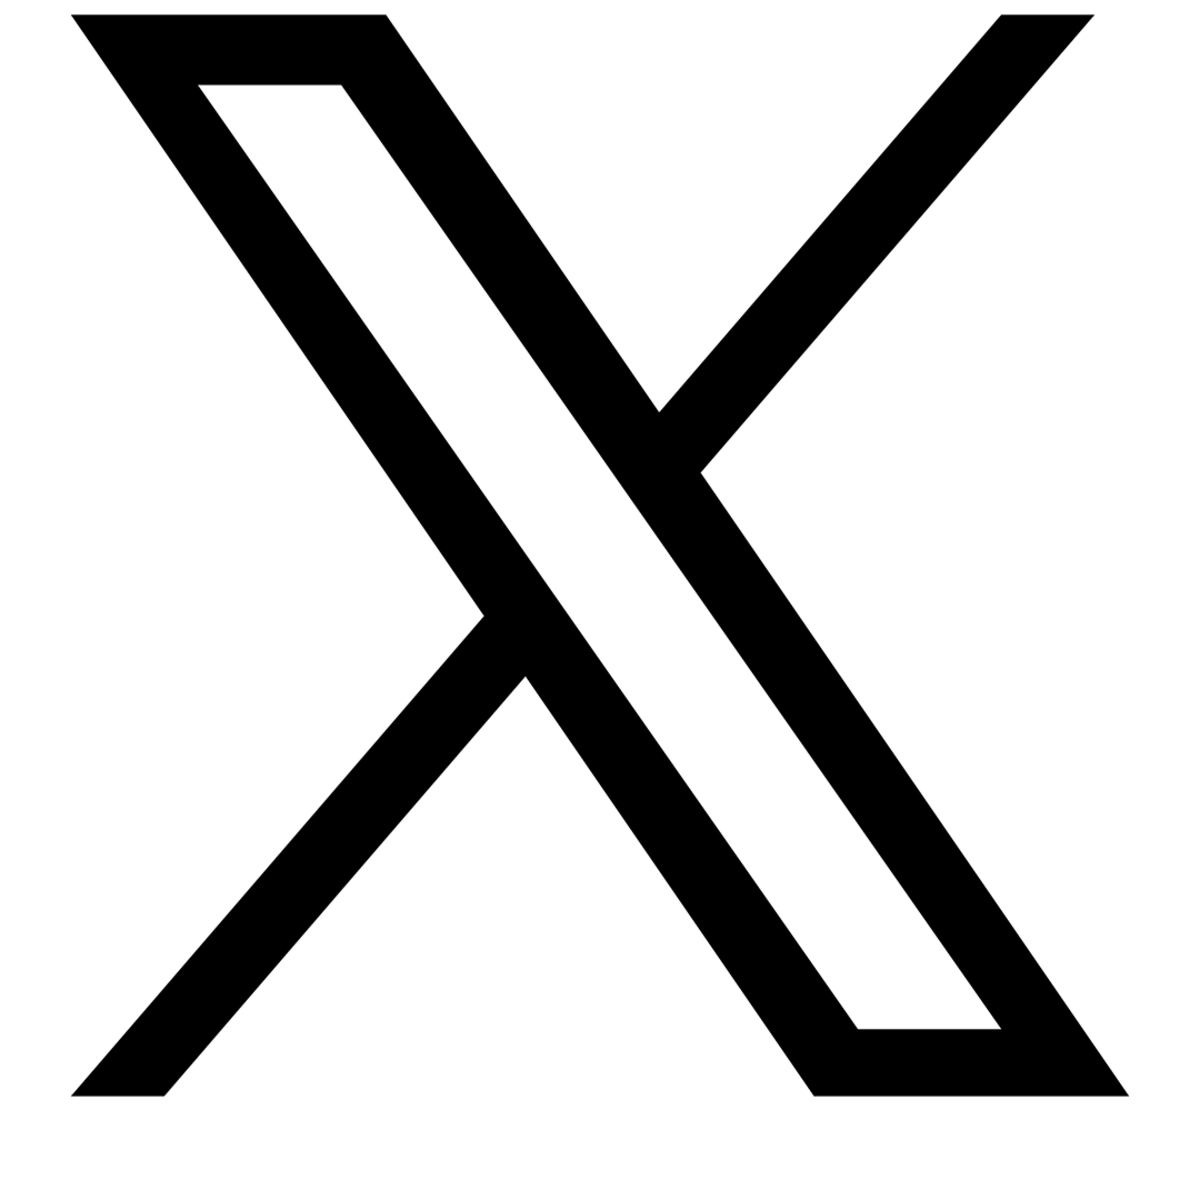 Logo for social media site "X", which is a giant letter "X"